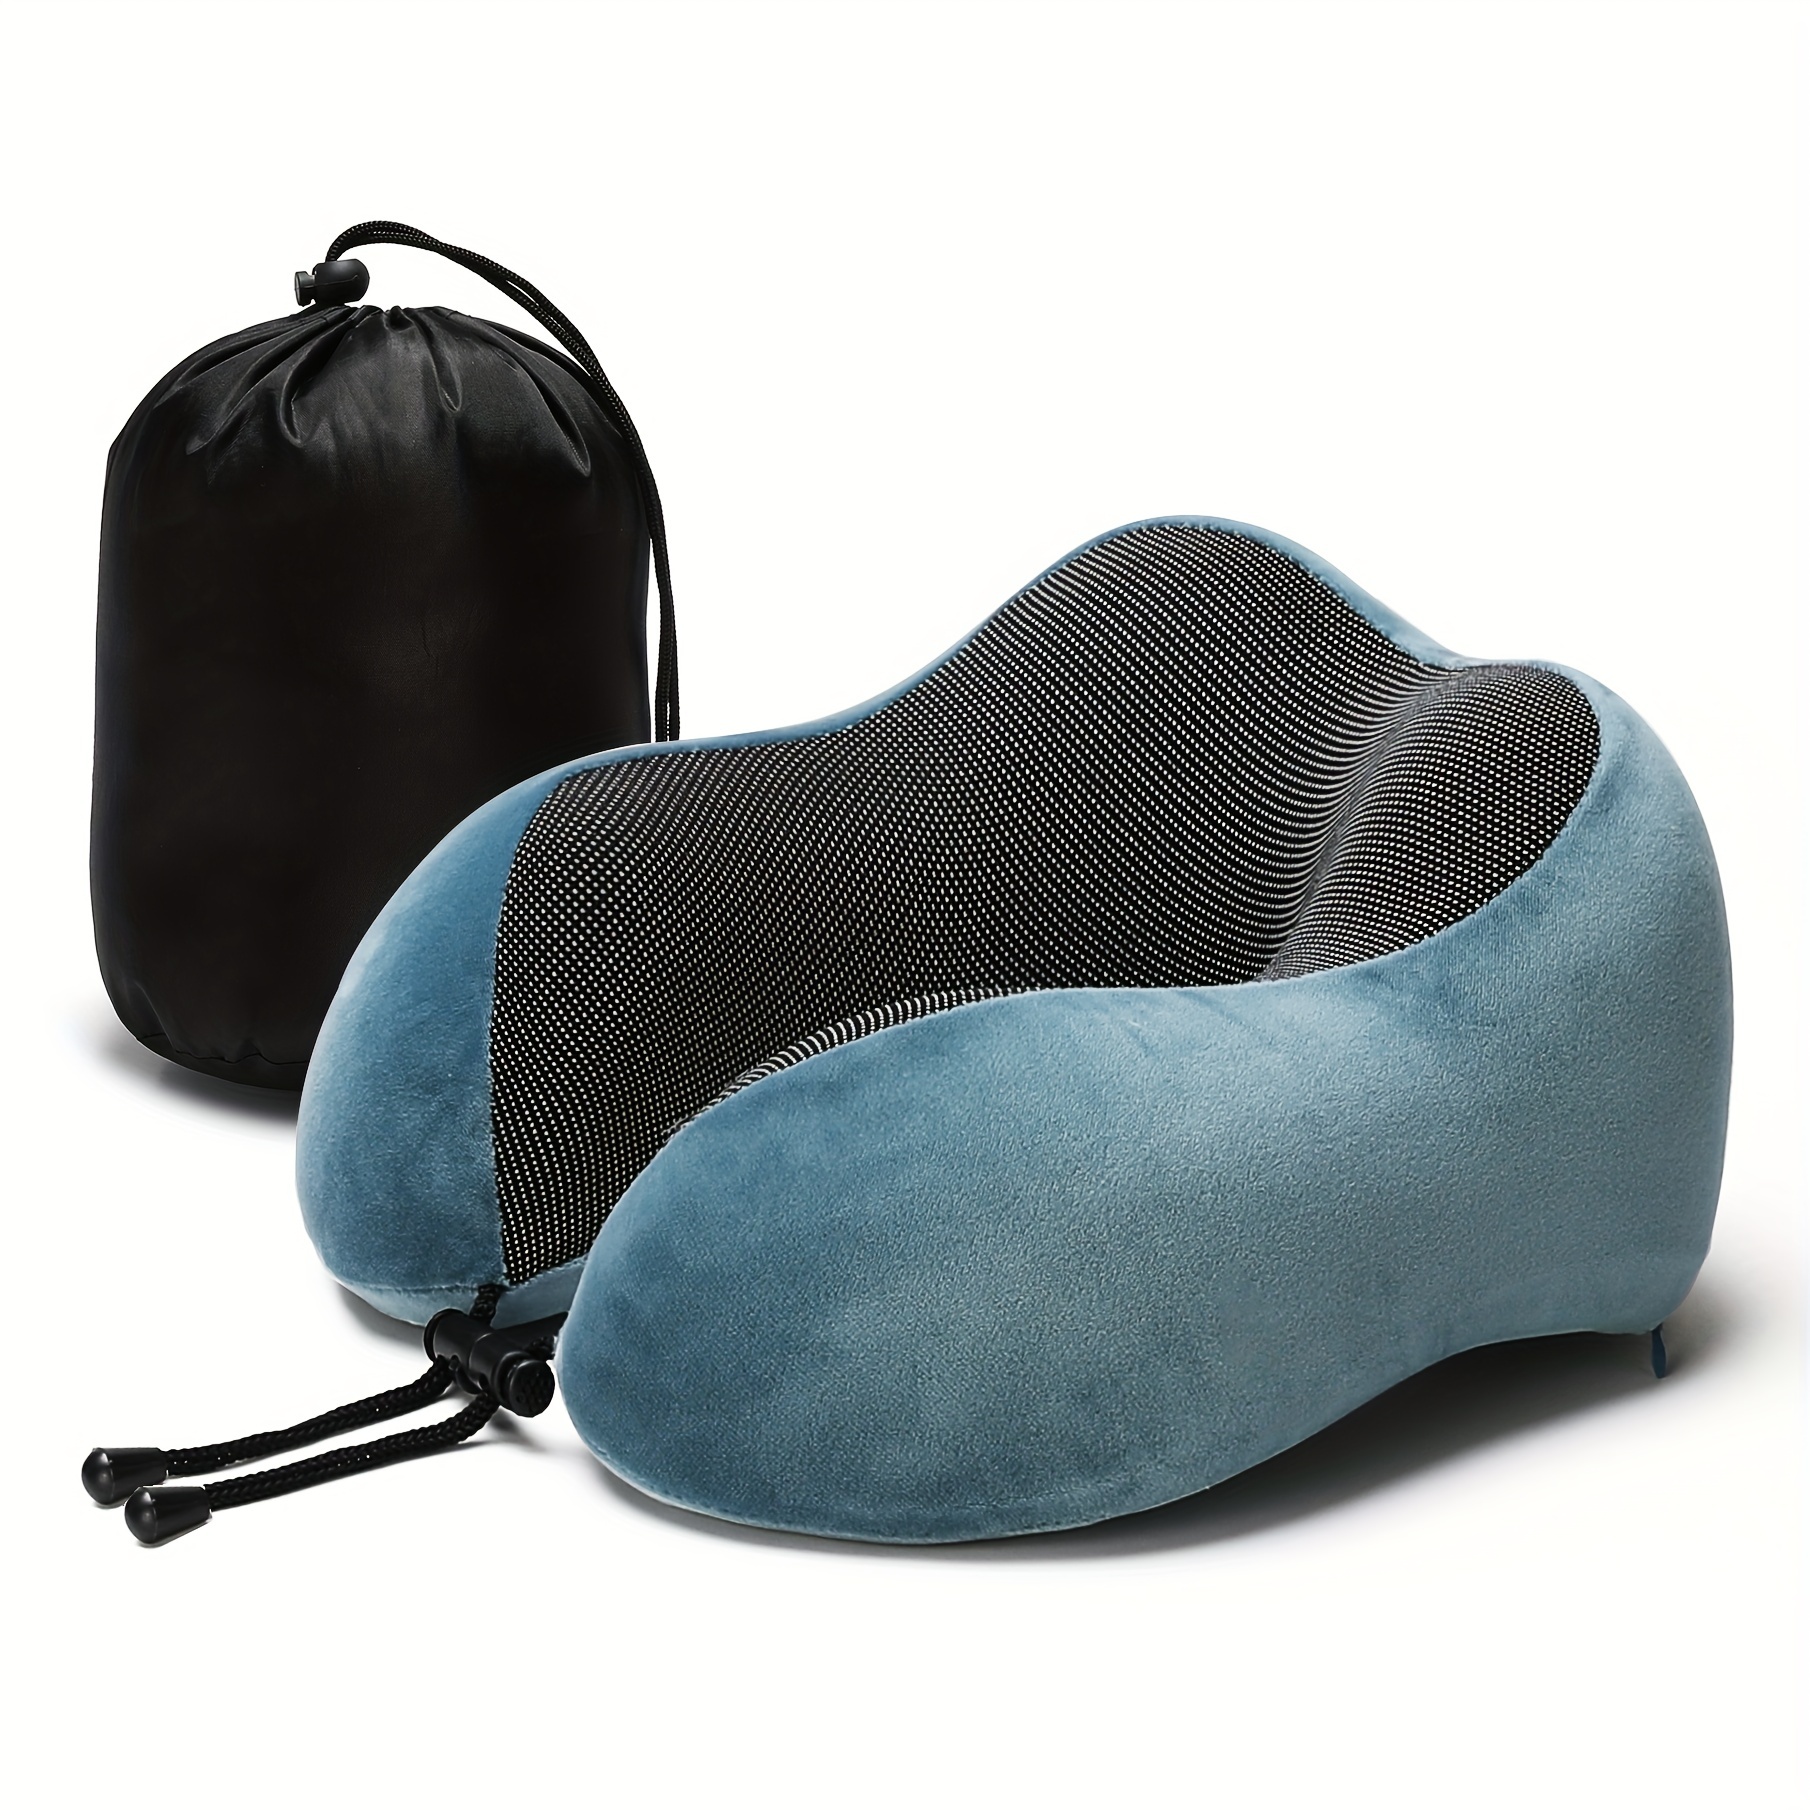 Pillow U-shaped Hump Traveler's Neck Is Soft, Breathable And Stretchy. Fall  Savings on Clearaance 